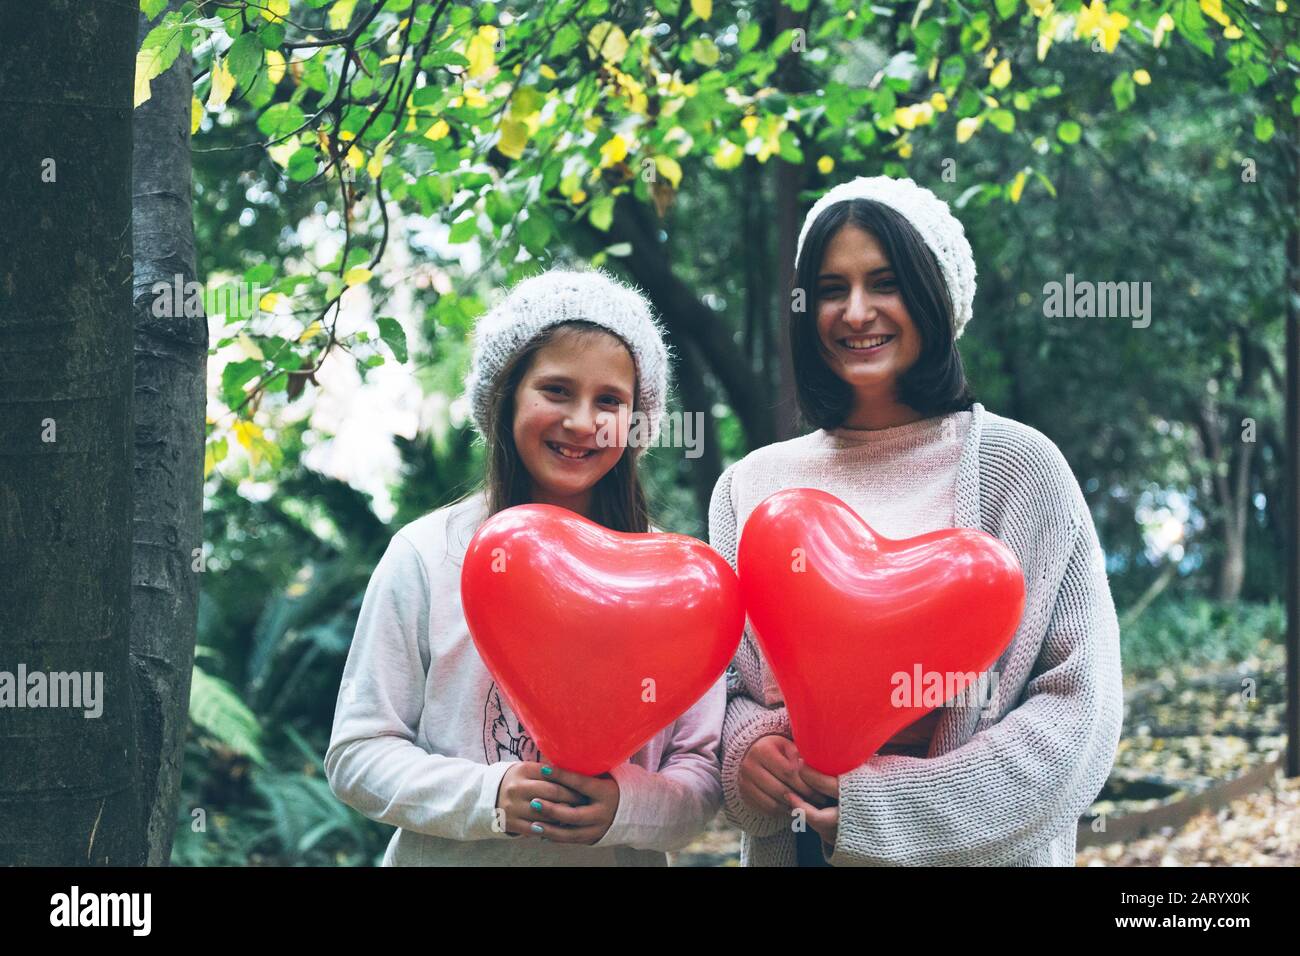 Smiling girls holding heart balloon by trees Stock Photo